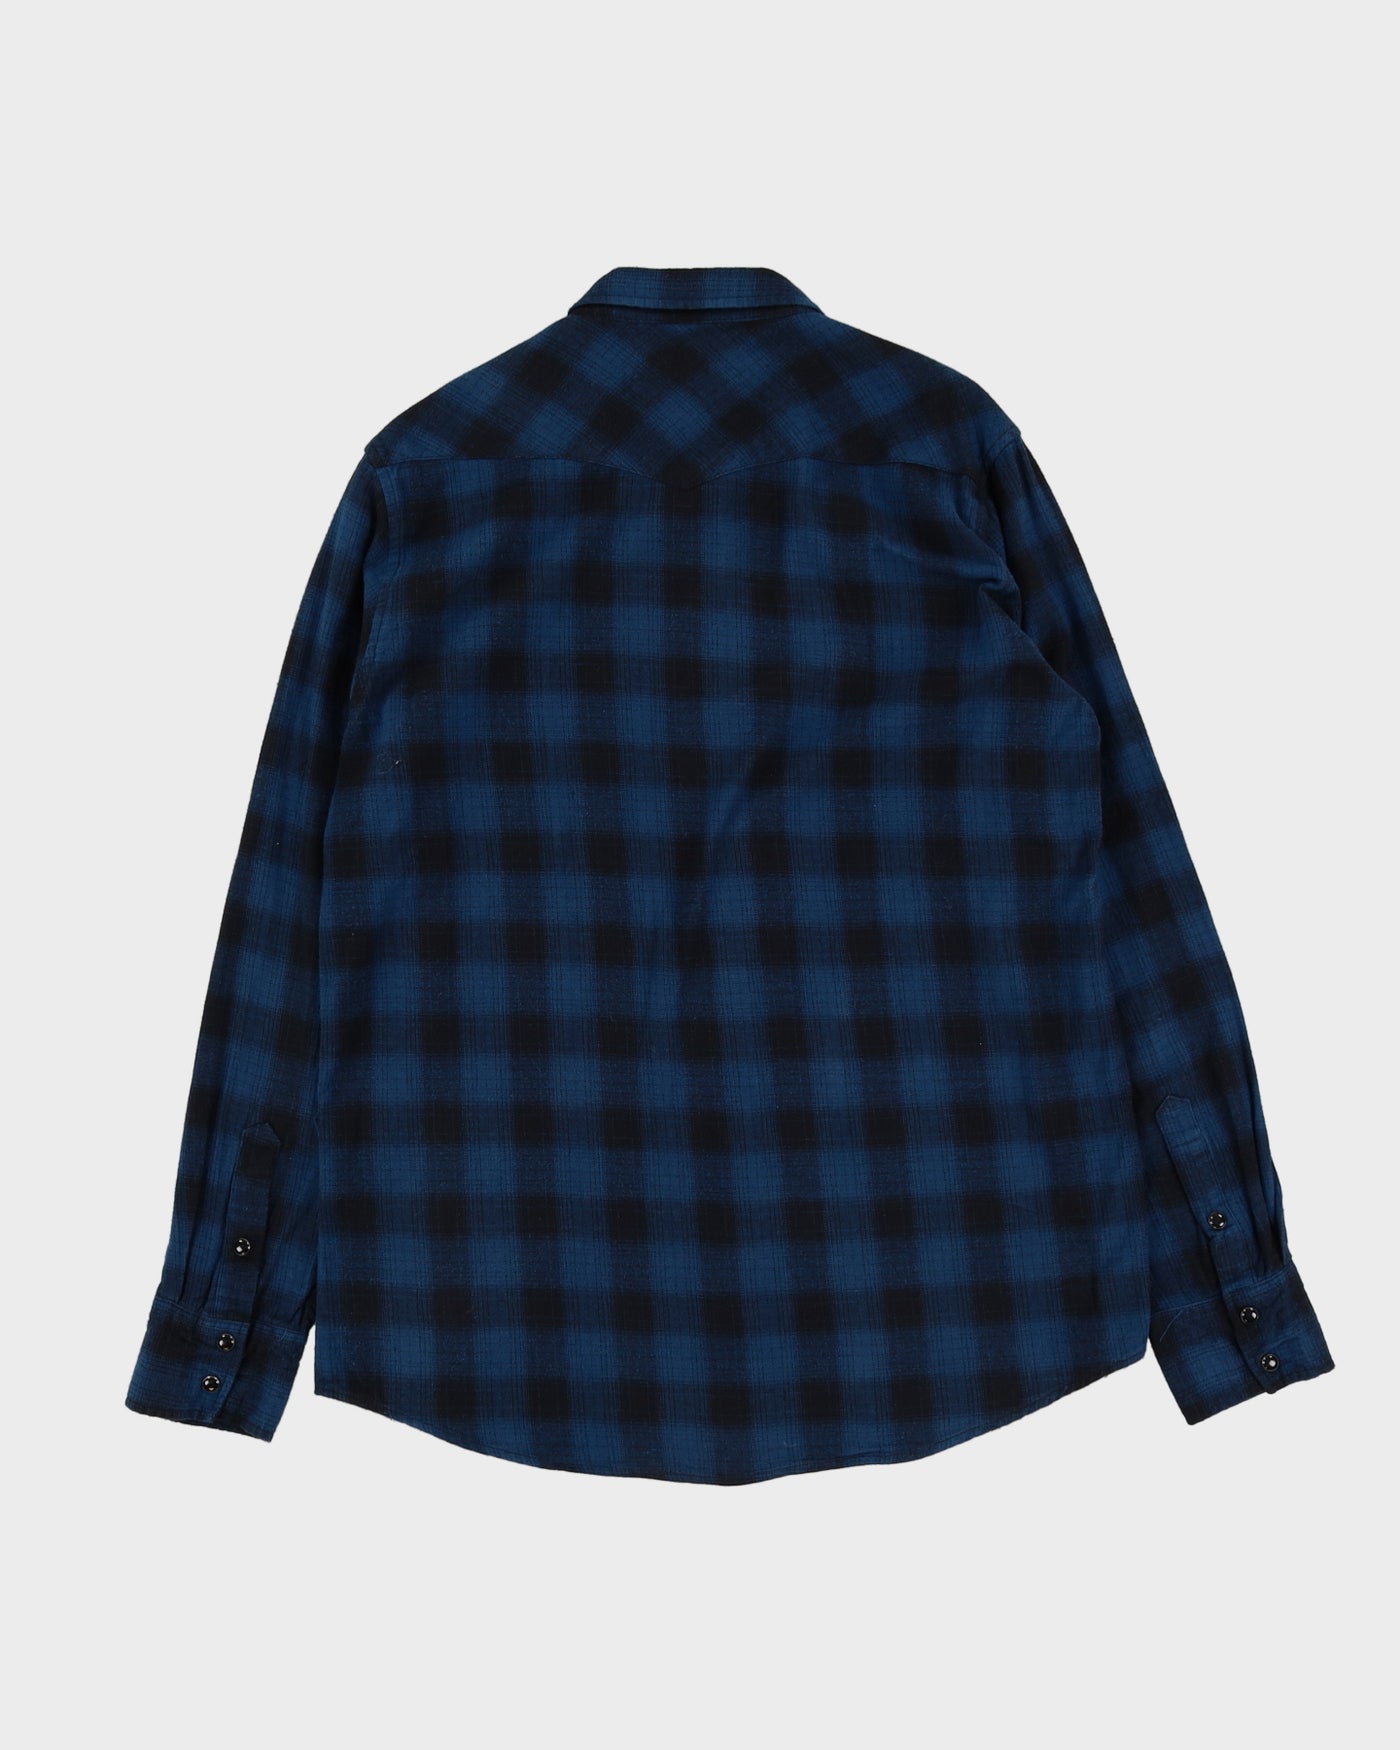 Dickies Blue And Black Checked Flannel Shirt - M / L